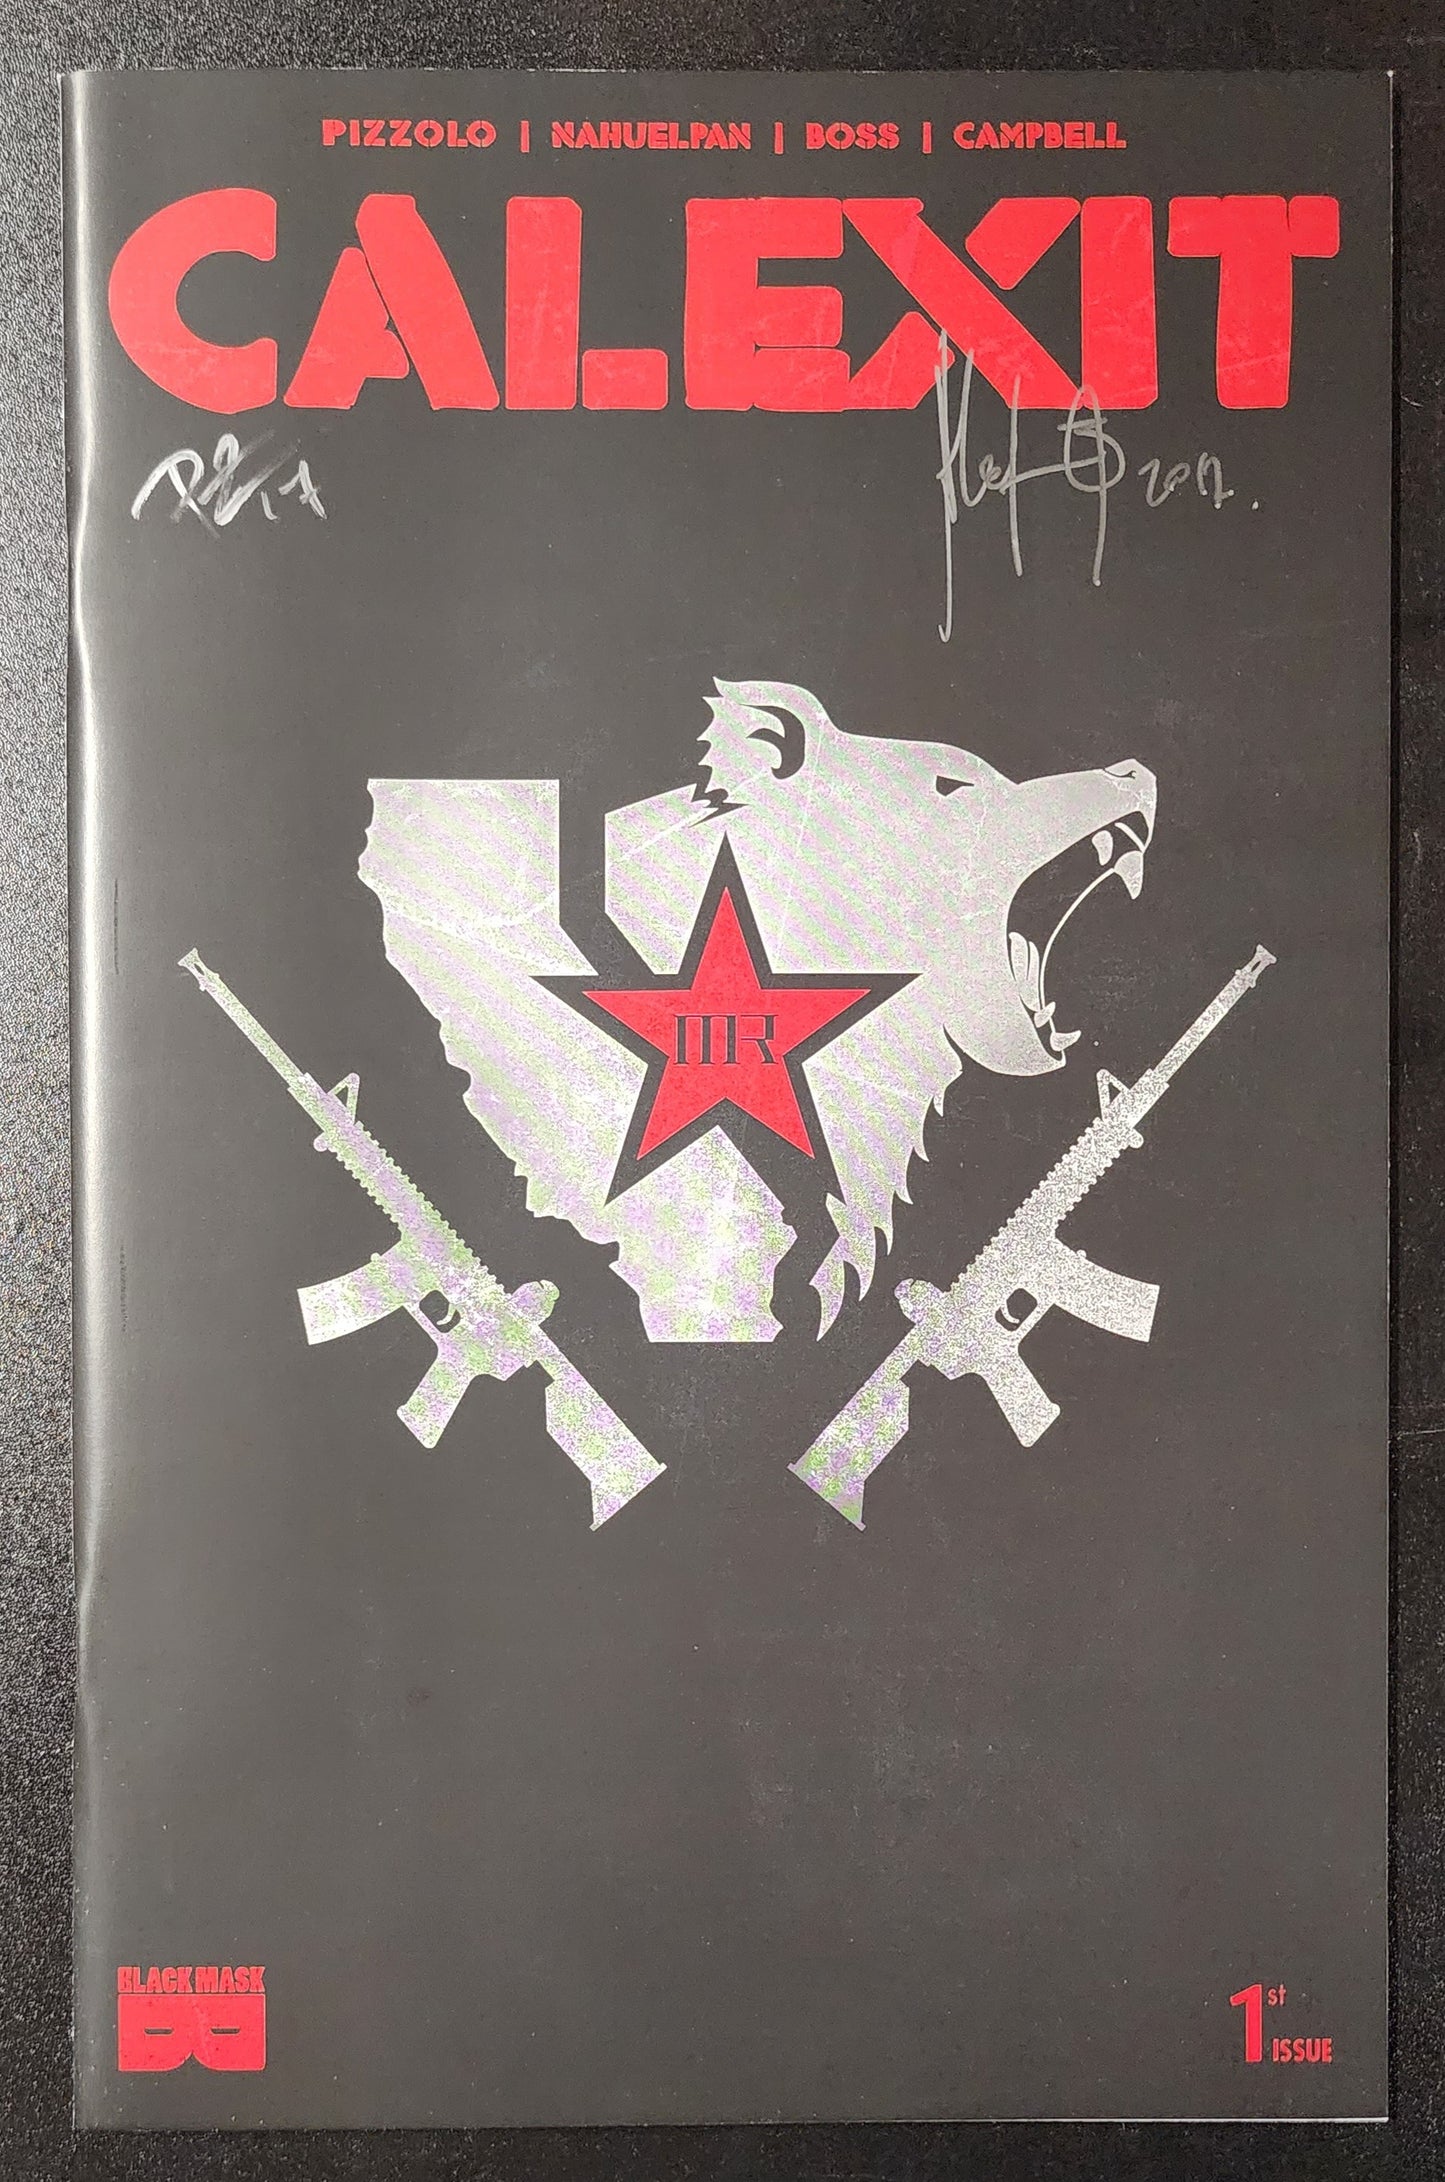 CALEXIT #1 NYCC VARIANT SIGNED BY PIZZOLO & NAHUELPAN 2017